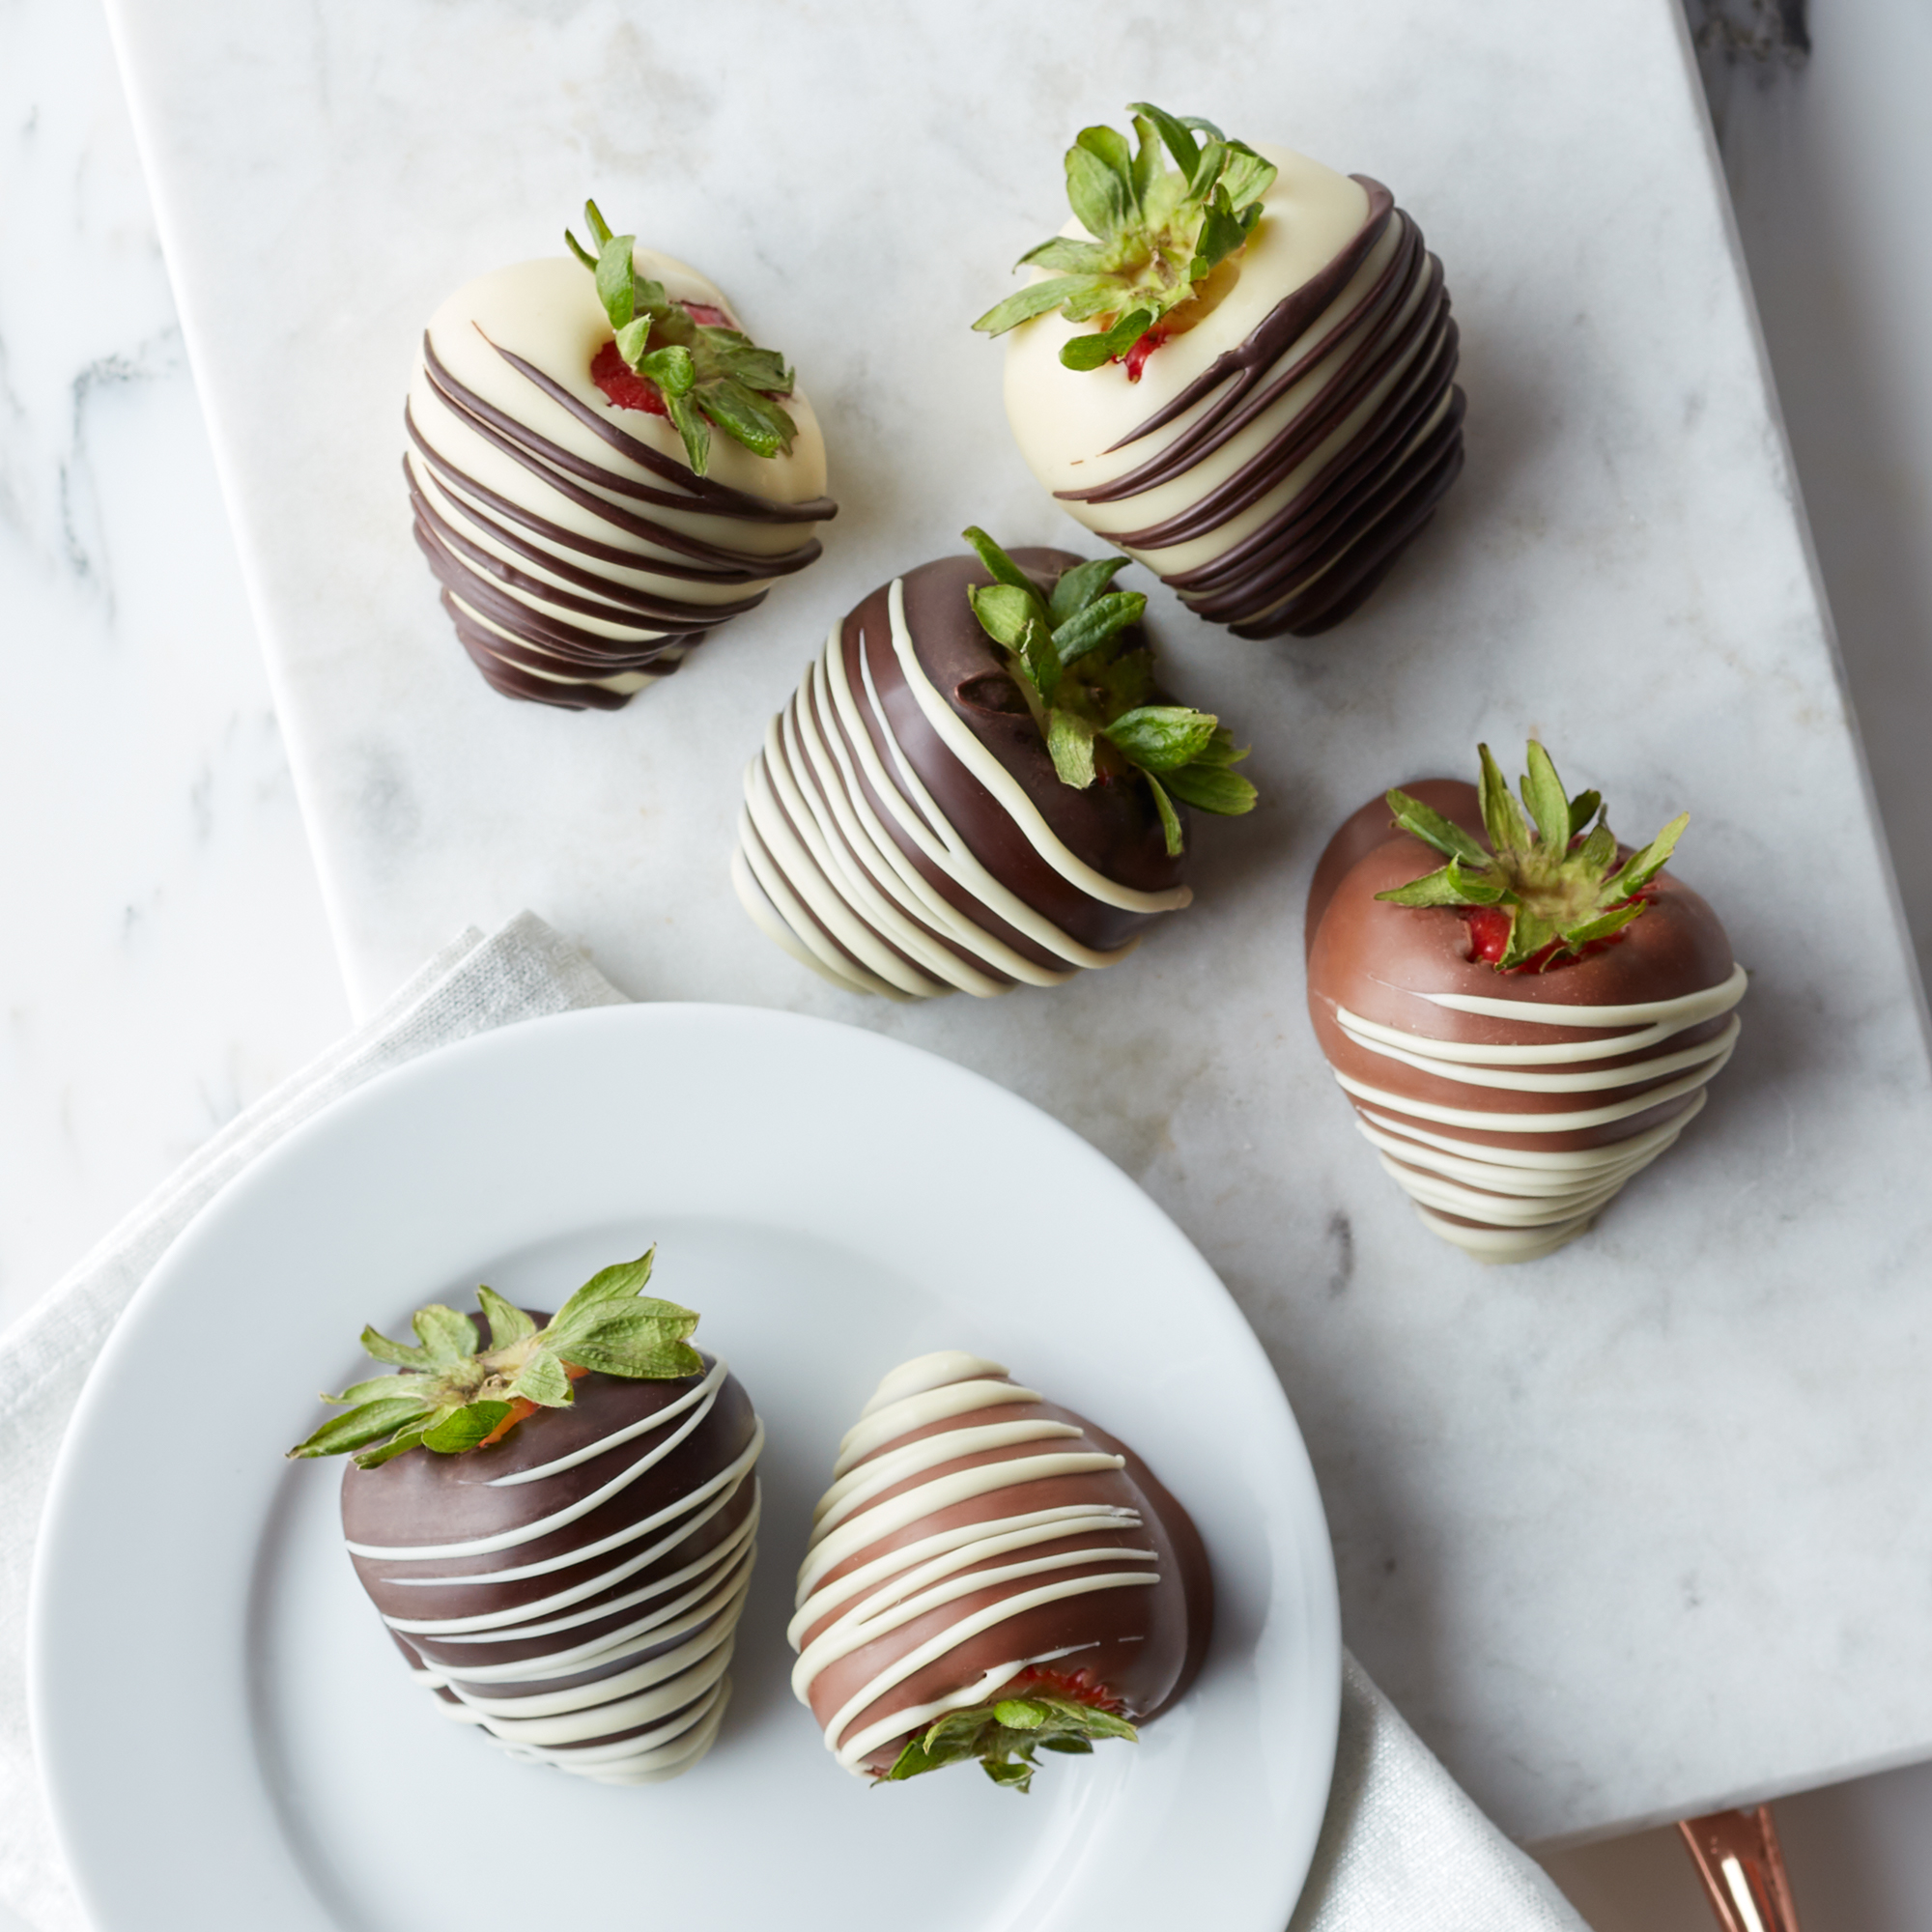 How to Make Chocolate Covered Strawberries • The Heirloom Pantry